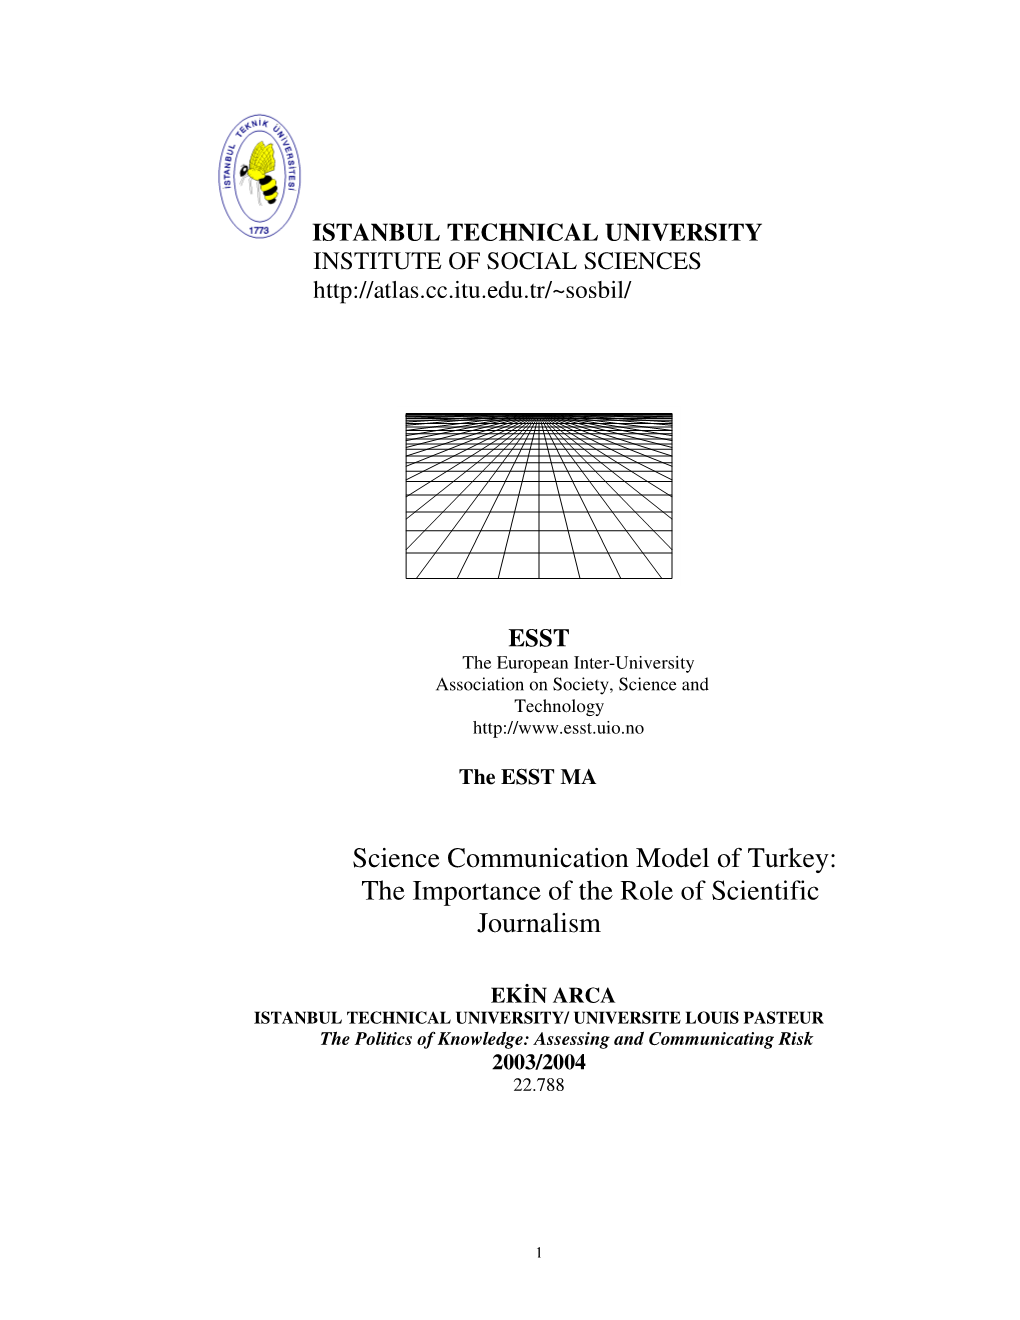 Science Communication Model of Turkey: the Importance of the Role of Scientific Journalism